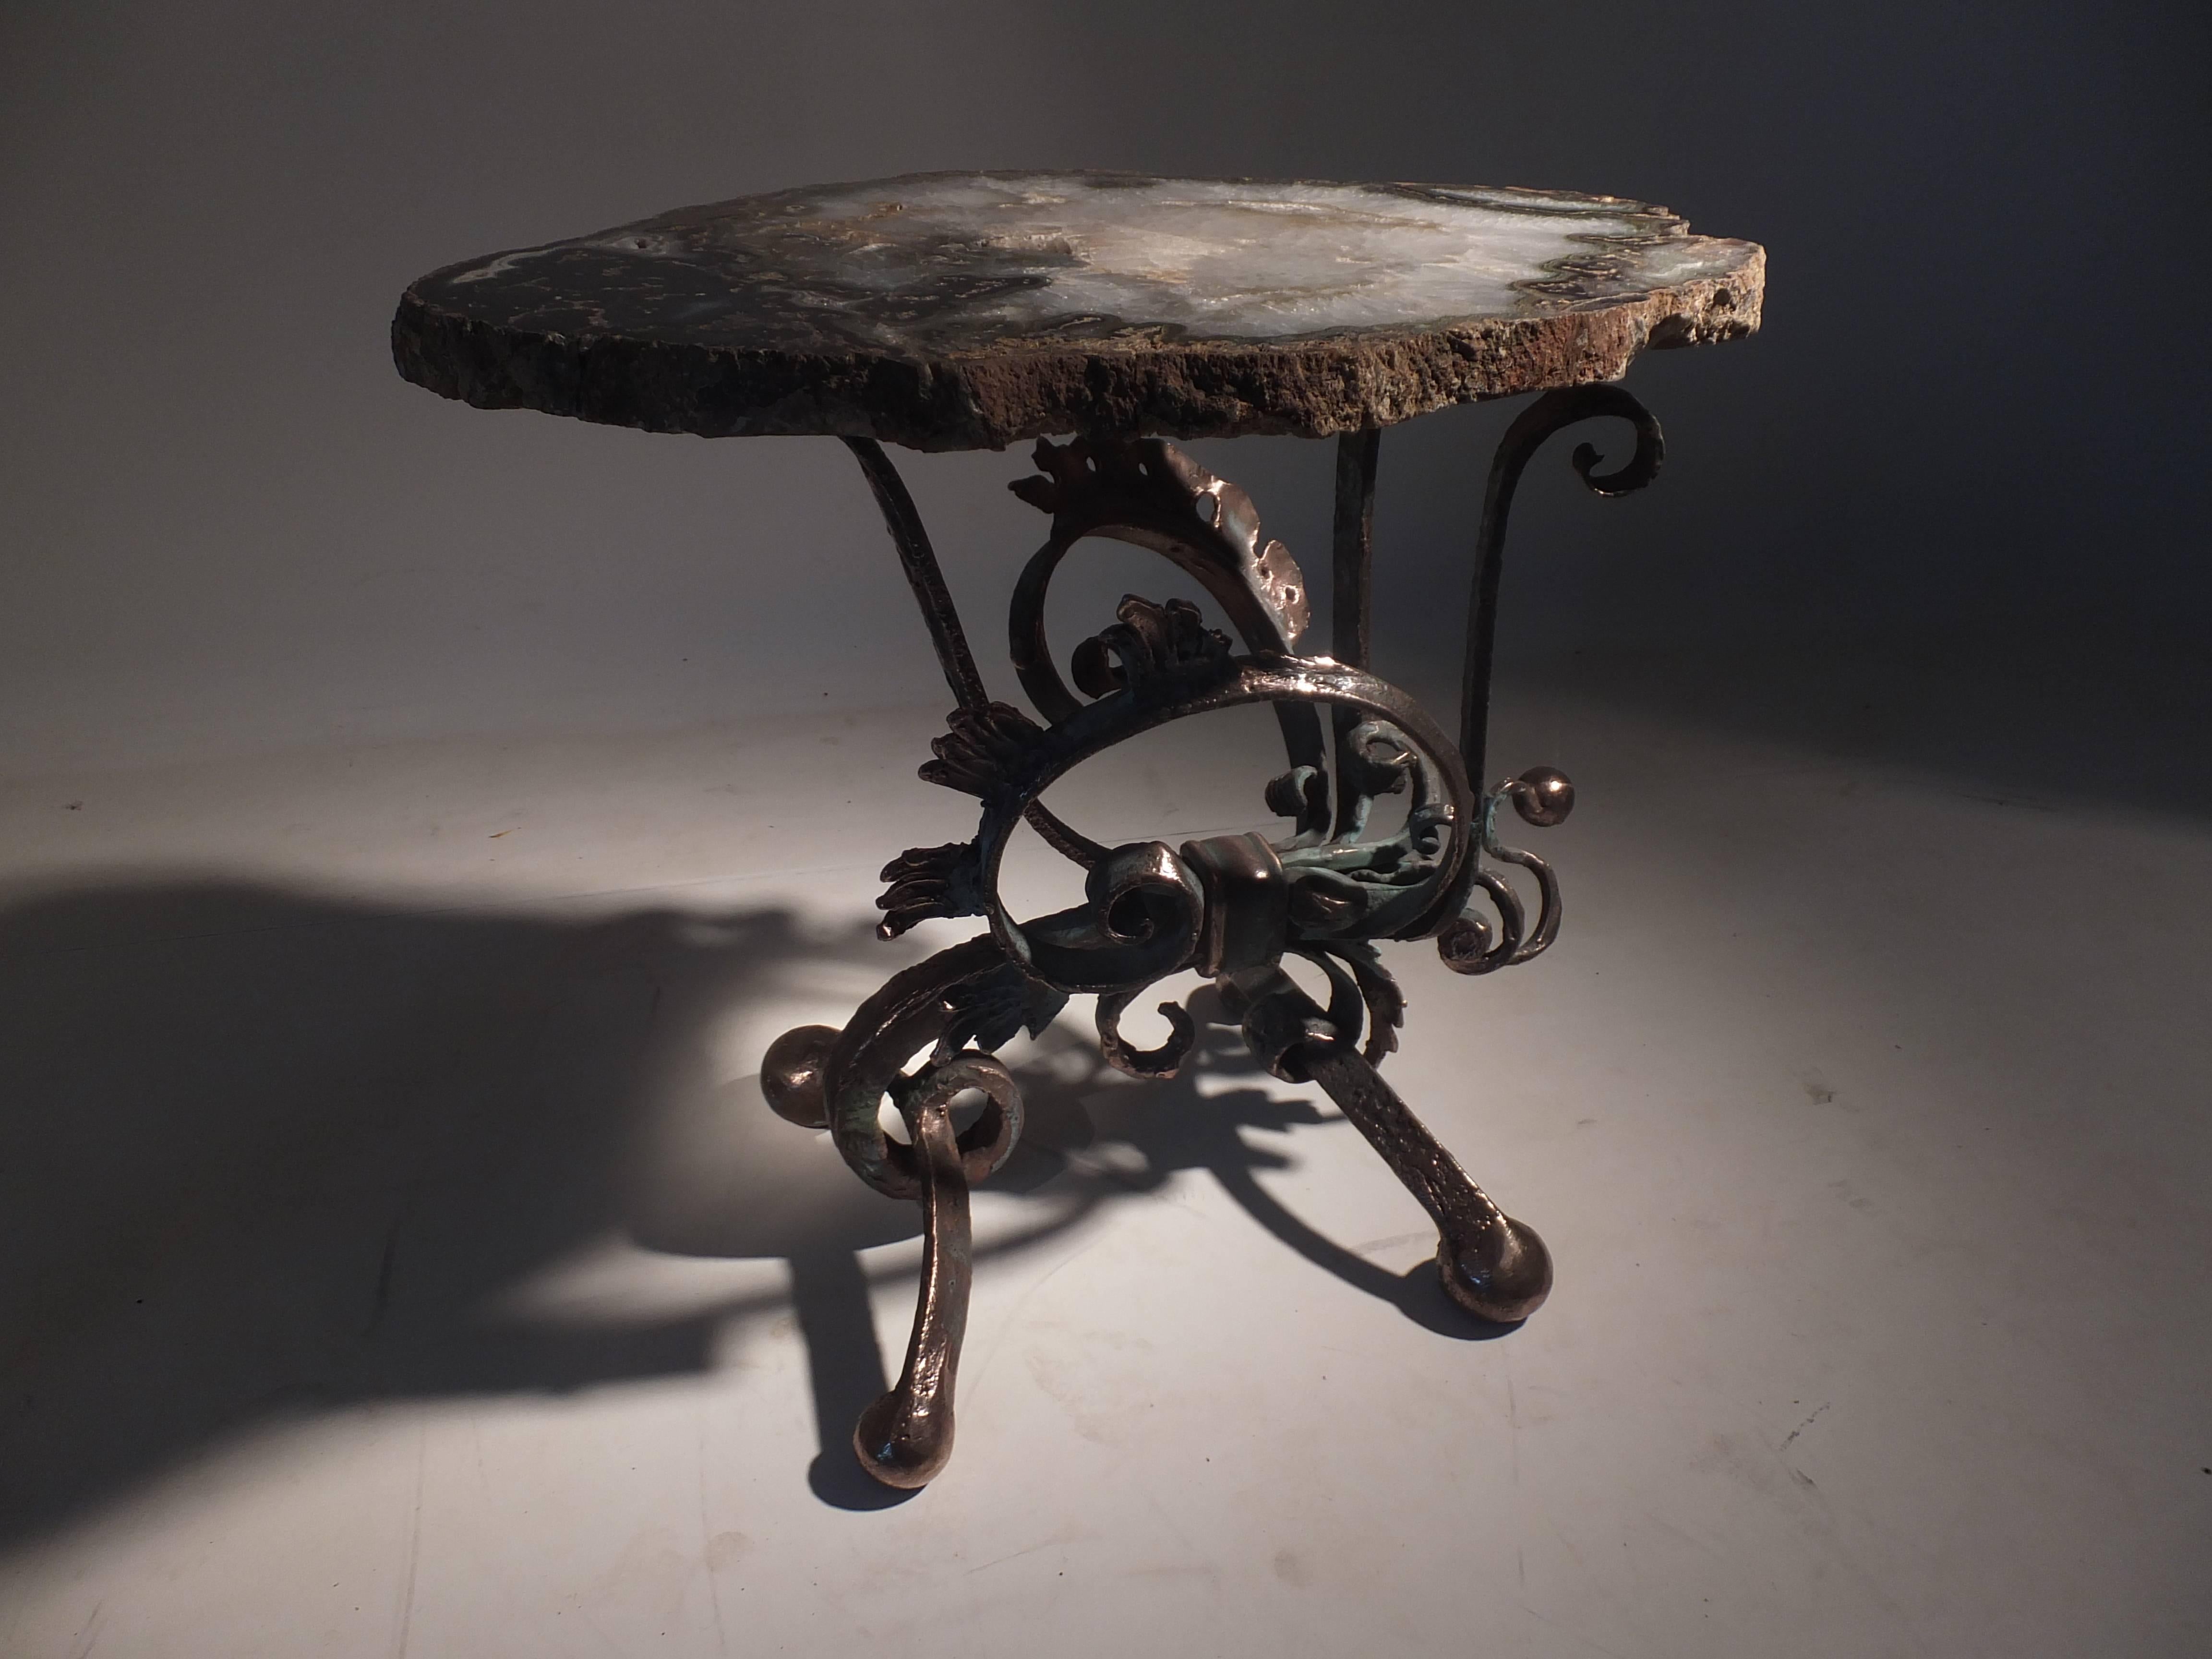 Mark Brazier-Jones 2012, Coffee table, Bronze coated iron, agate, patinated and waxed legs. Measures: 45 x 65 cm, height 59 cm, unique piece, signed
Exhibitions
Creative Salvage Group Show I The Cuts Gallery, Kensington, London W8 1984.
Creative